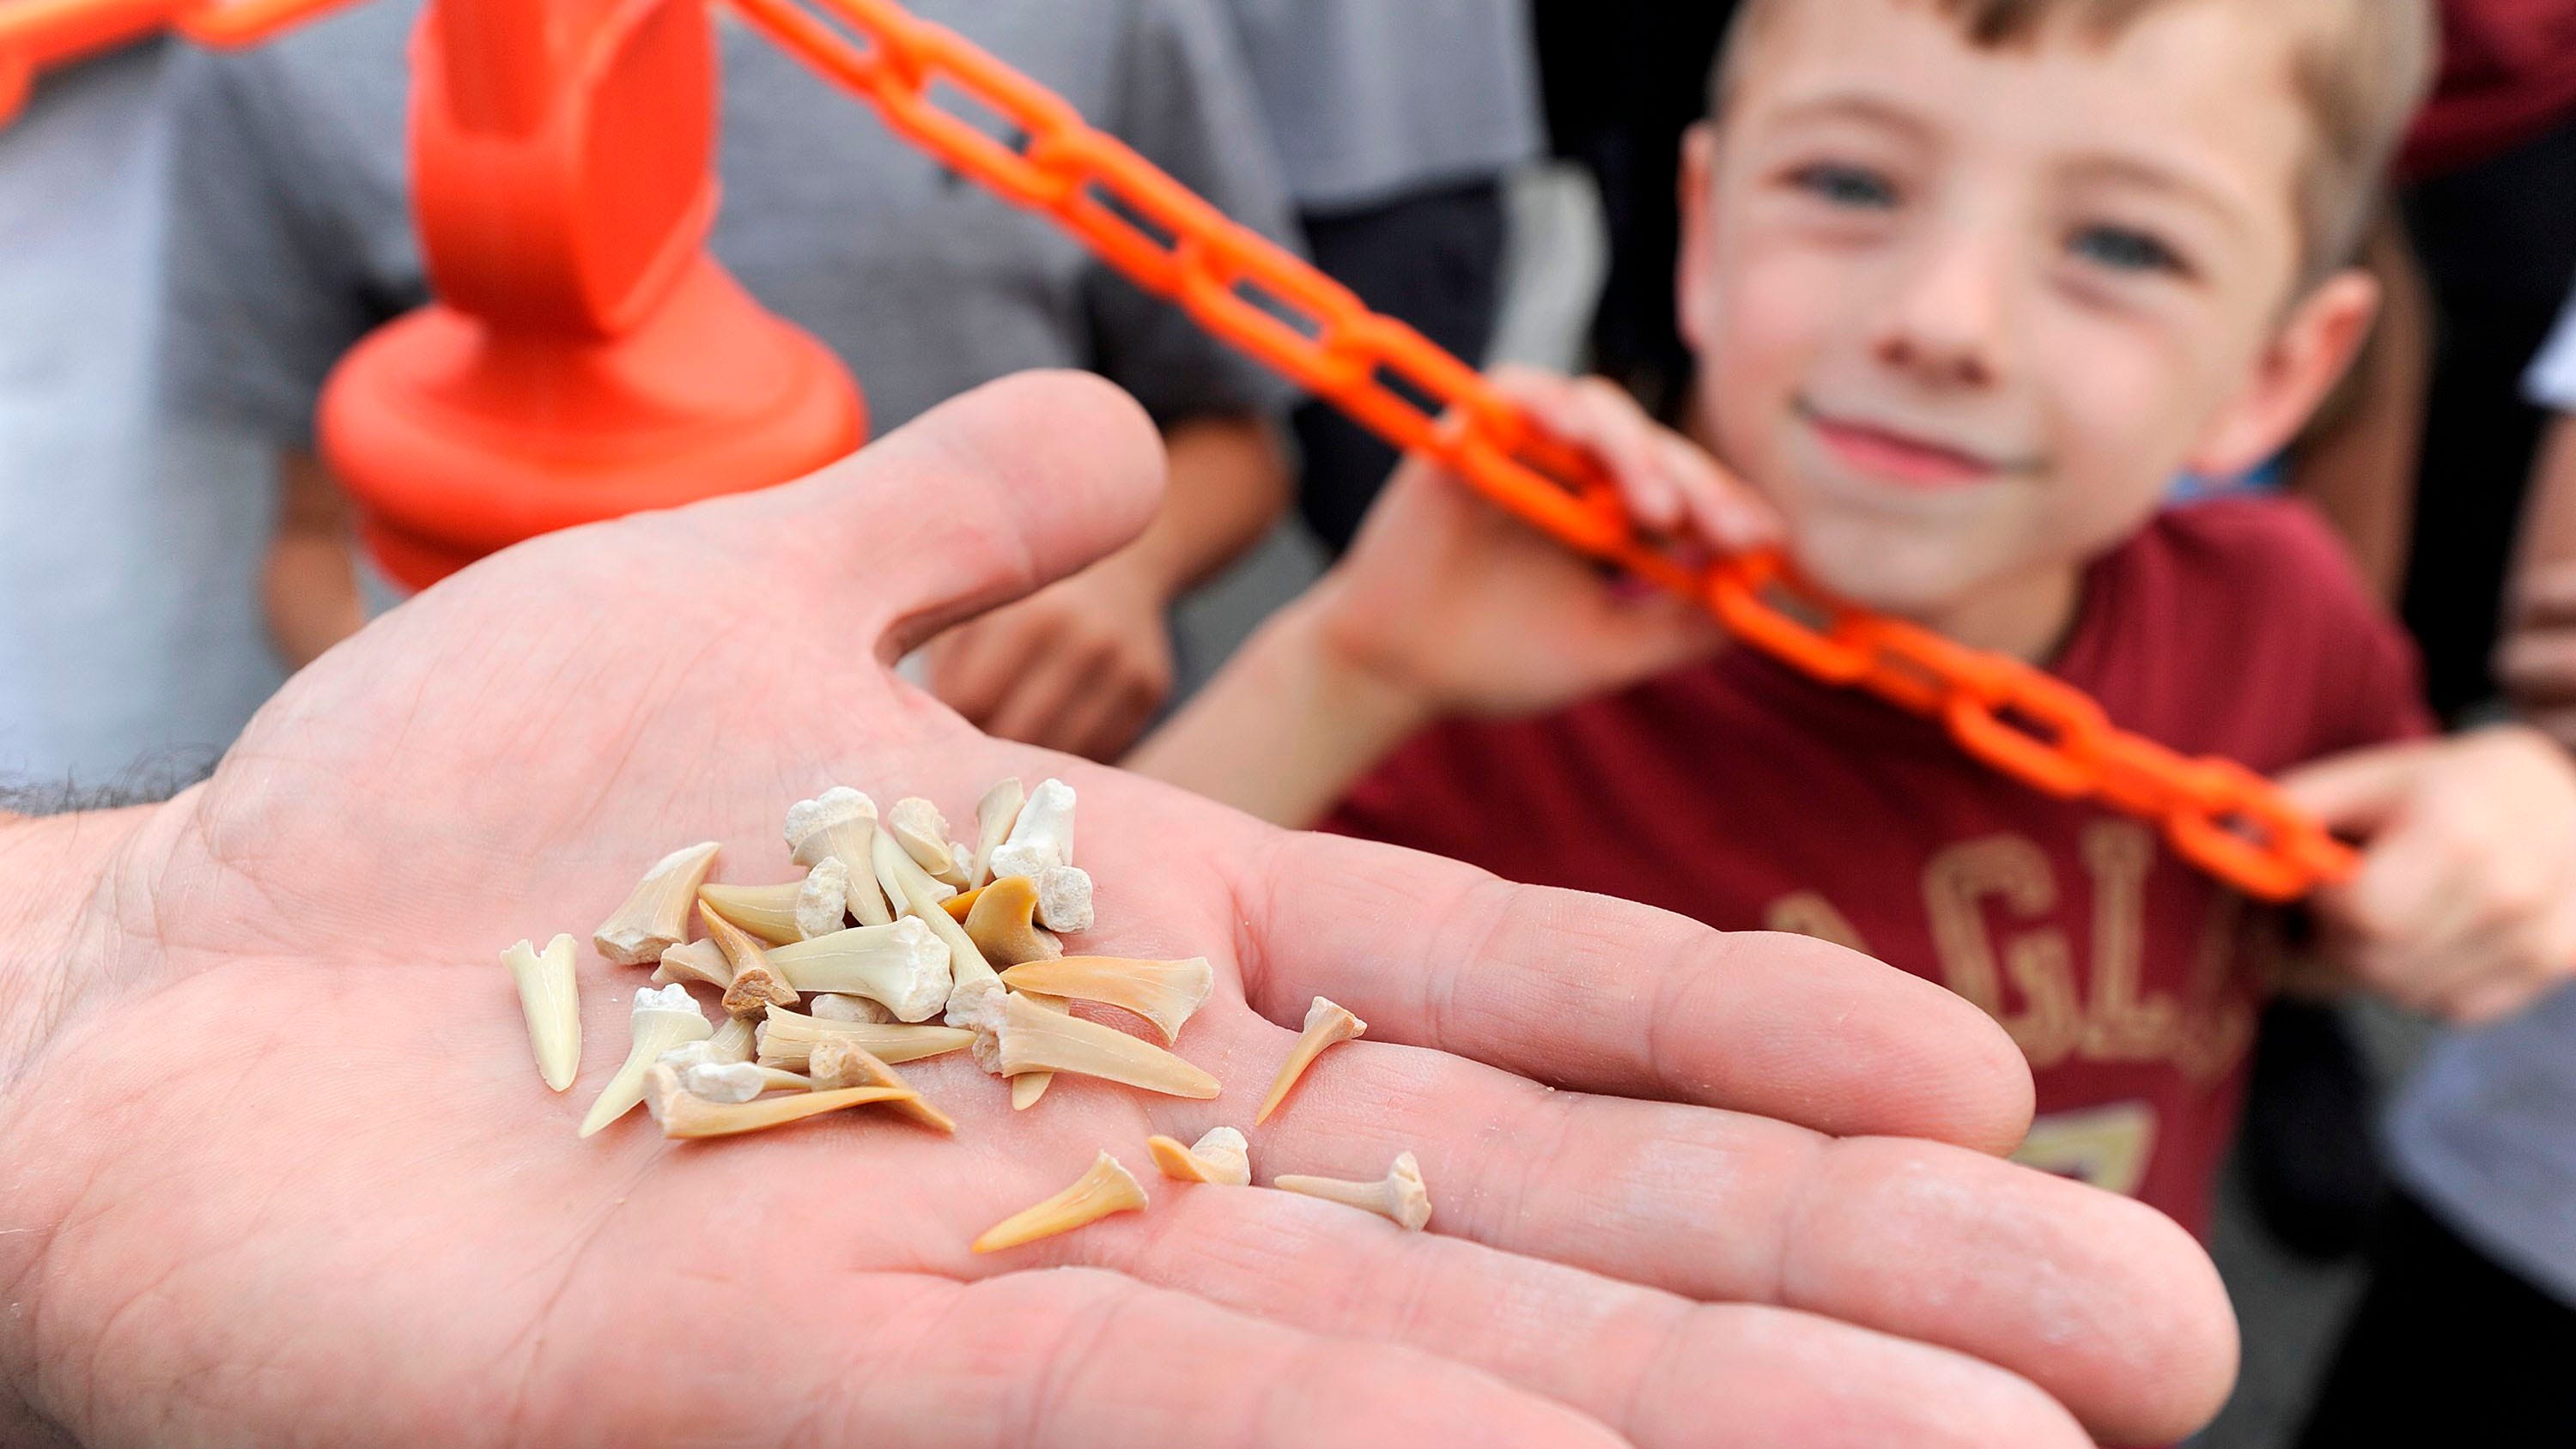 Shark tooth hunting: How to find toothy treasures and where to search